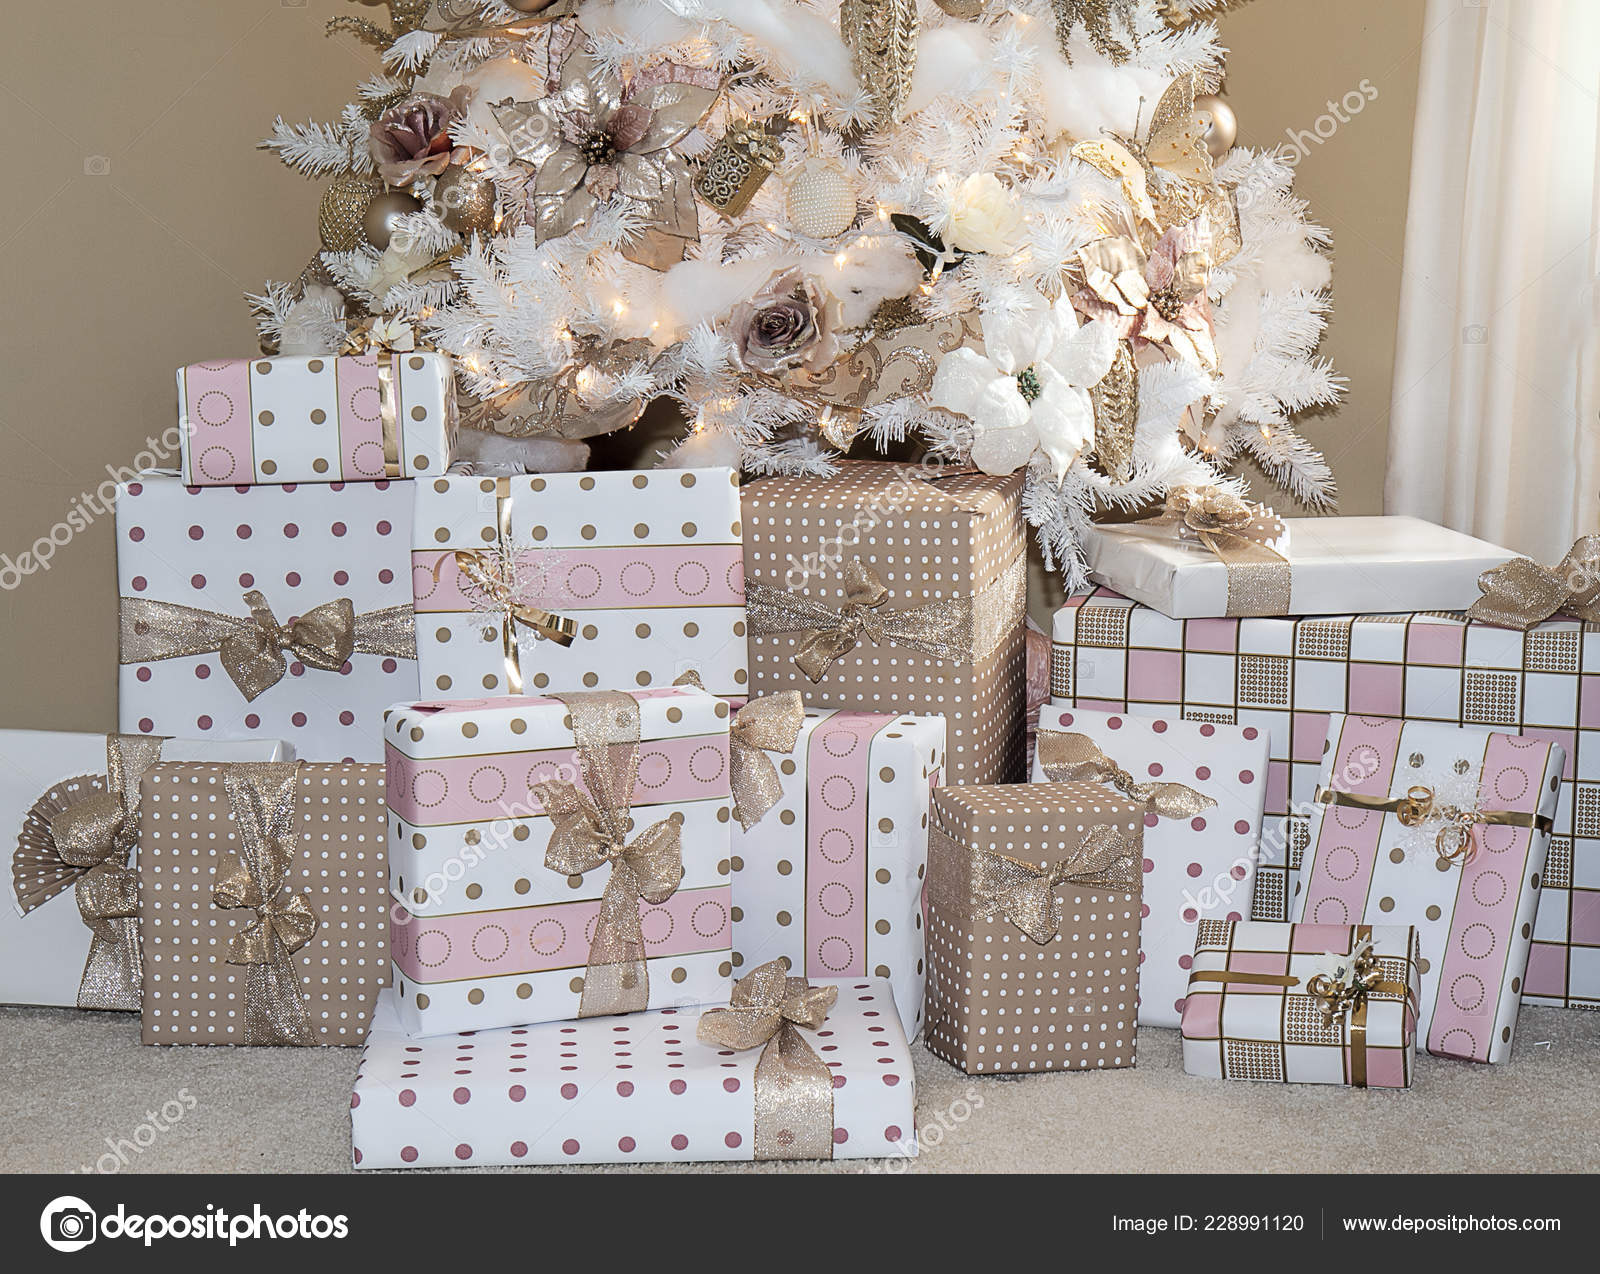 Dreamy White Christmas Tree Popular Blush Pink Ornaments Decorations Christmas Stock Photo C Trudywilkerson 228991120